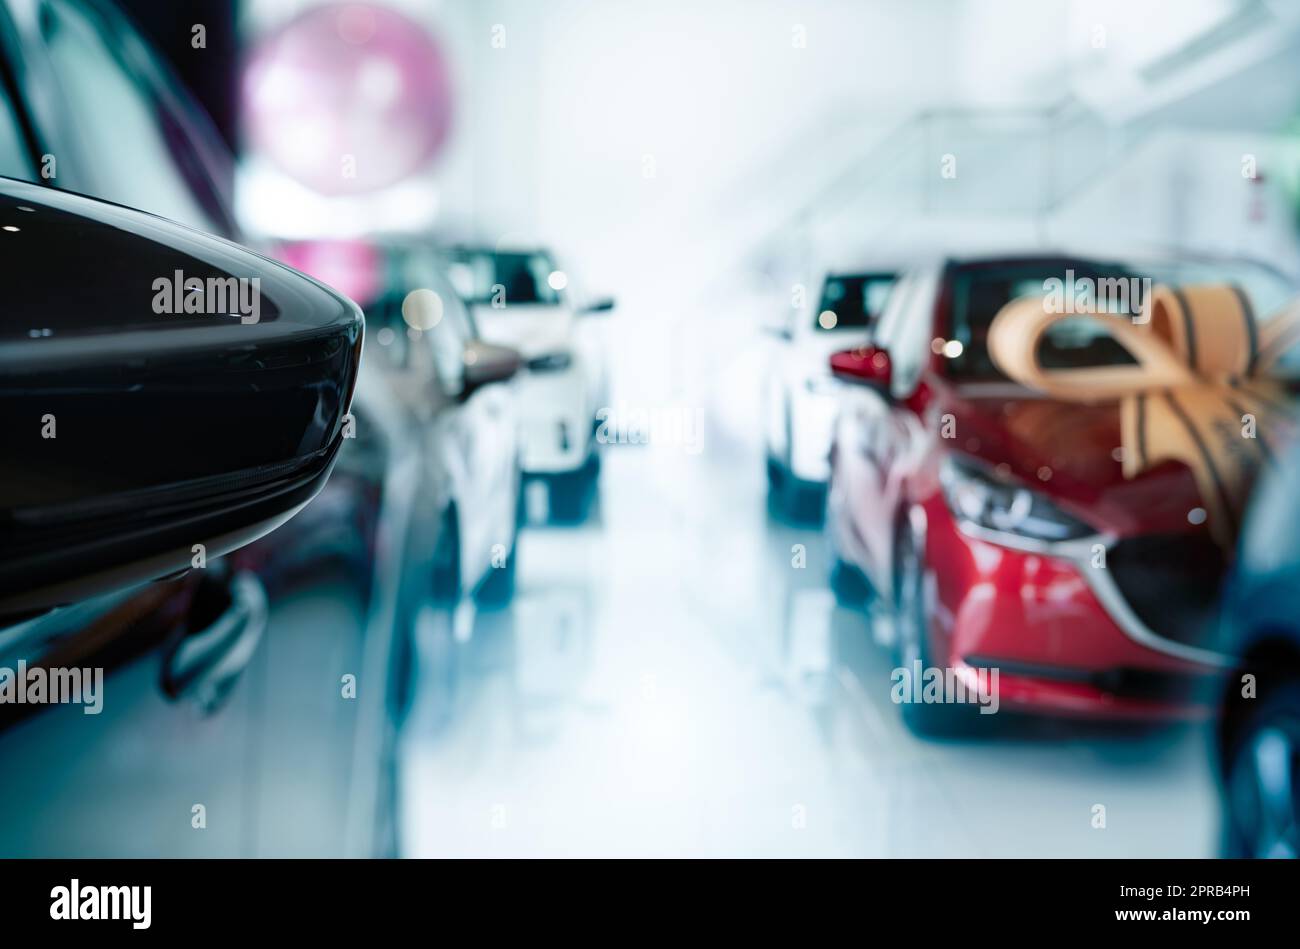 Car parked in luxury showroom. New car parked in modern showroom. Car dealership office. Automobile leasing and insurance concept. Automotive industry. Auto leasing business. Electric vehicle dealer. Stock Photo